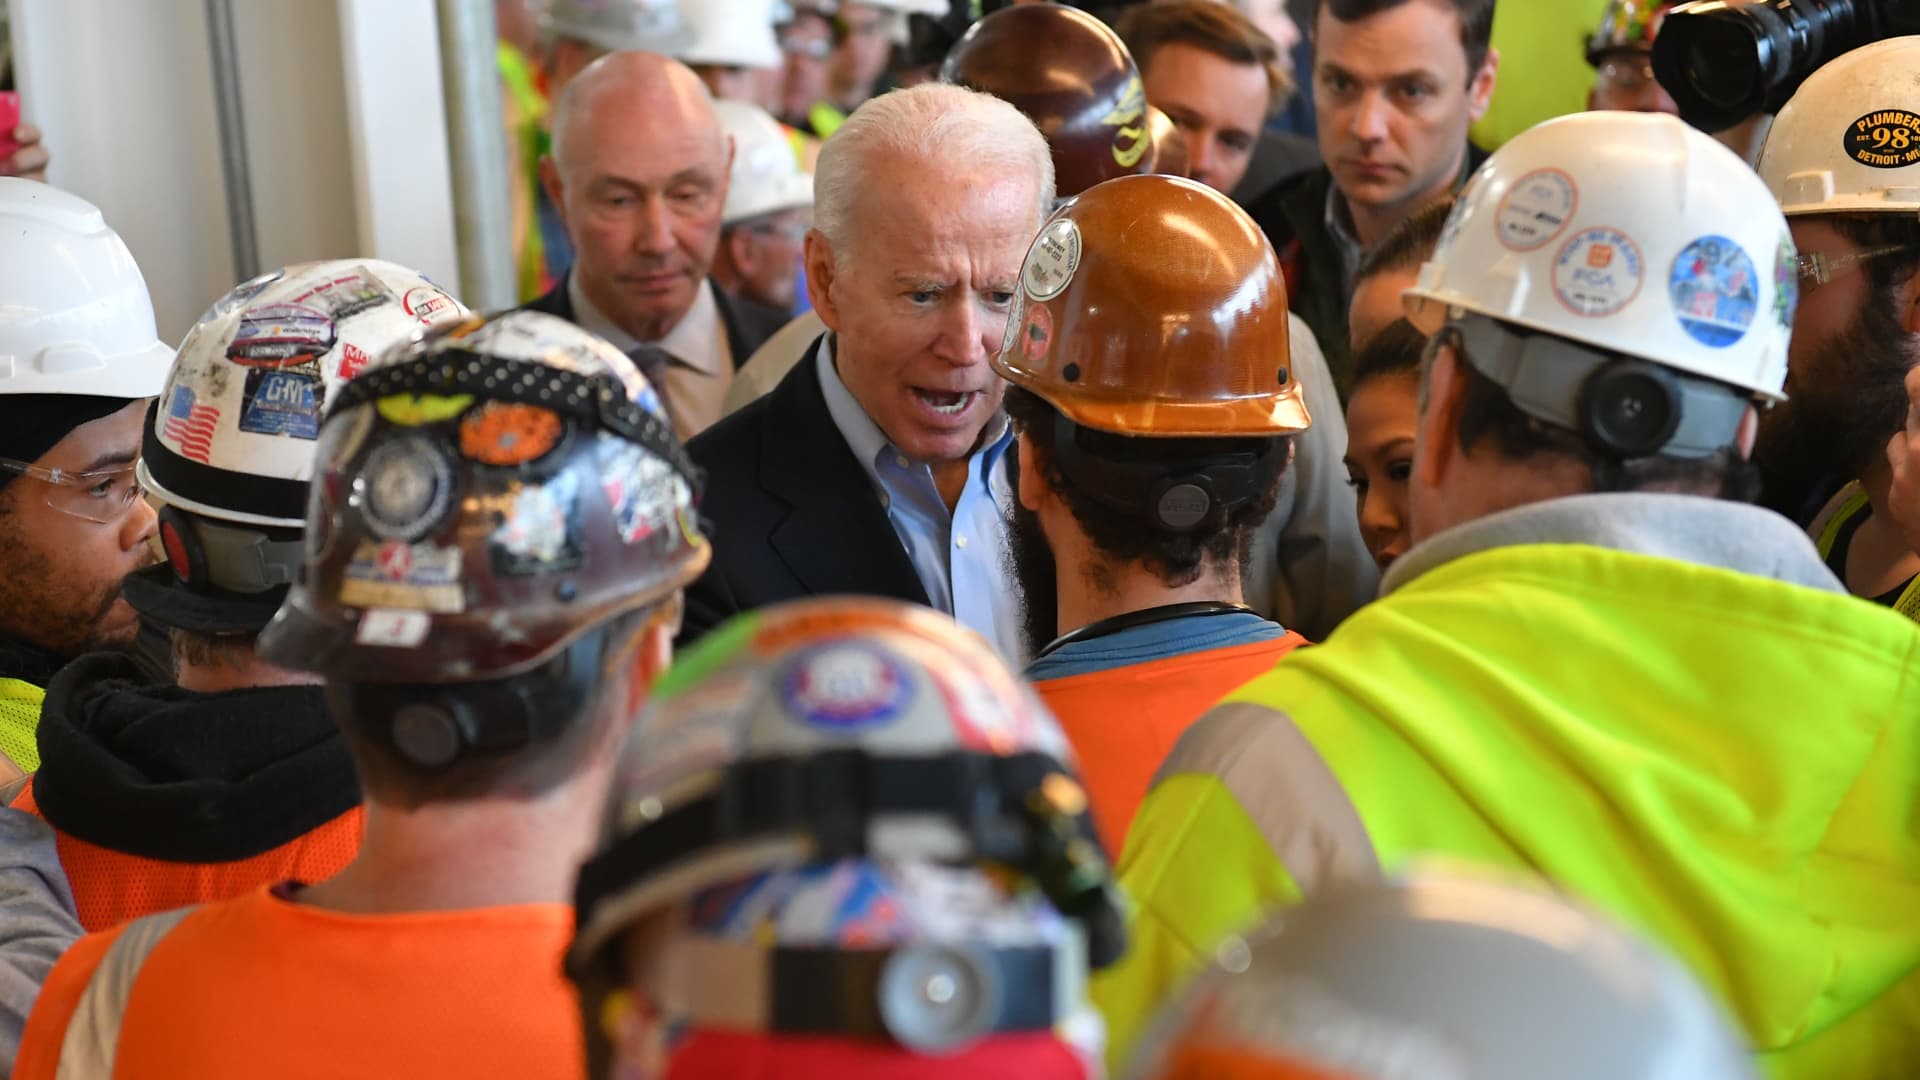 Then-Democratic presidential candidate Joe Biden meets workers as he tours the Fiat Chrysler plant in Detroit, Michigan on March 10, 2020.